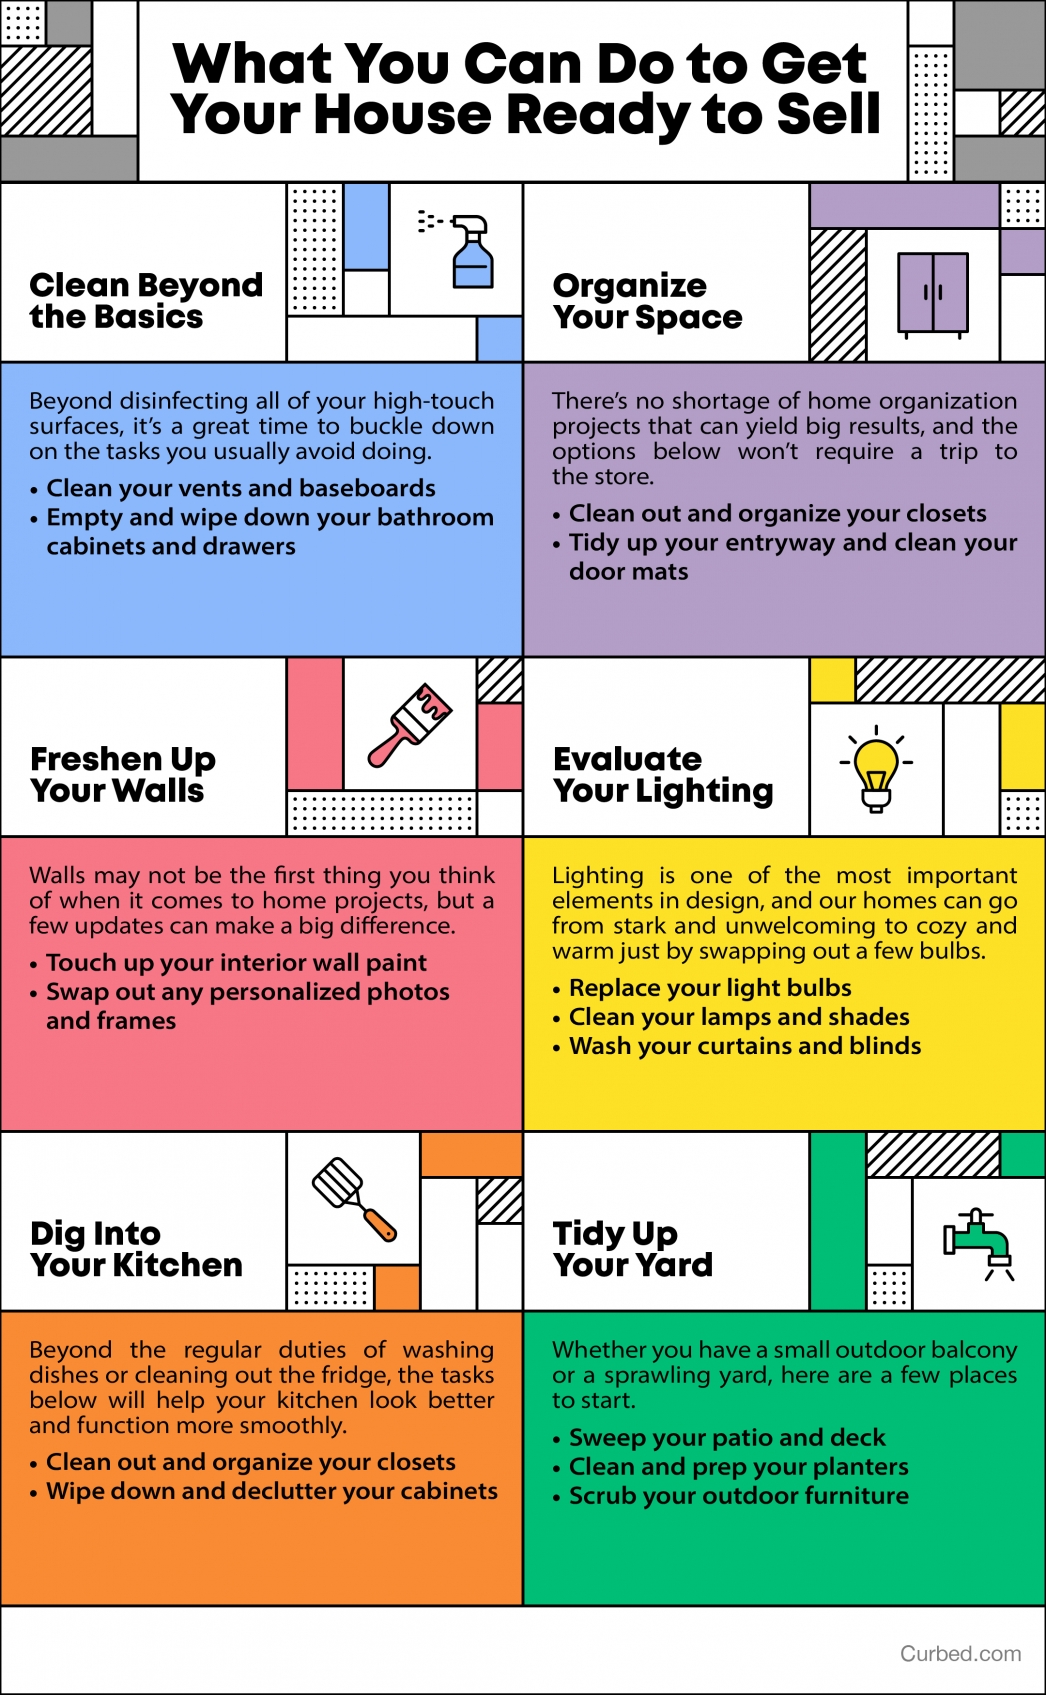 What You Can Do to Get Your House Ready to Sell info graphic